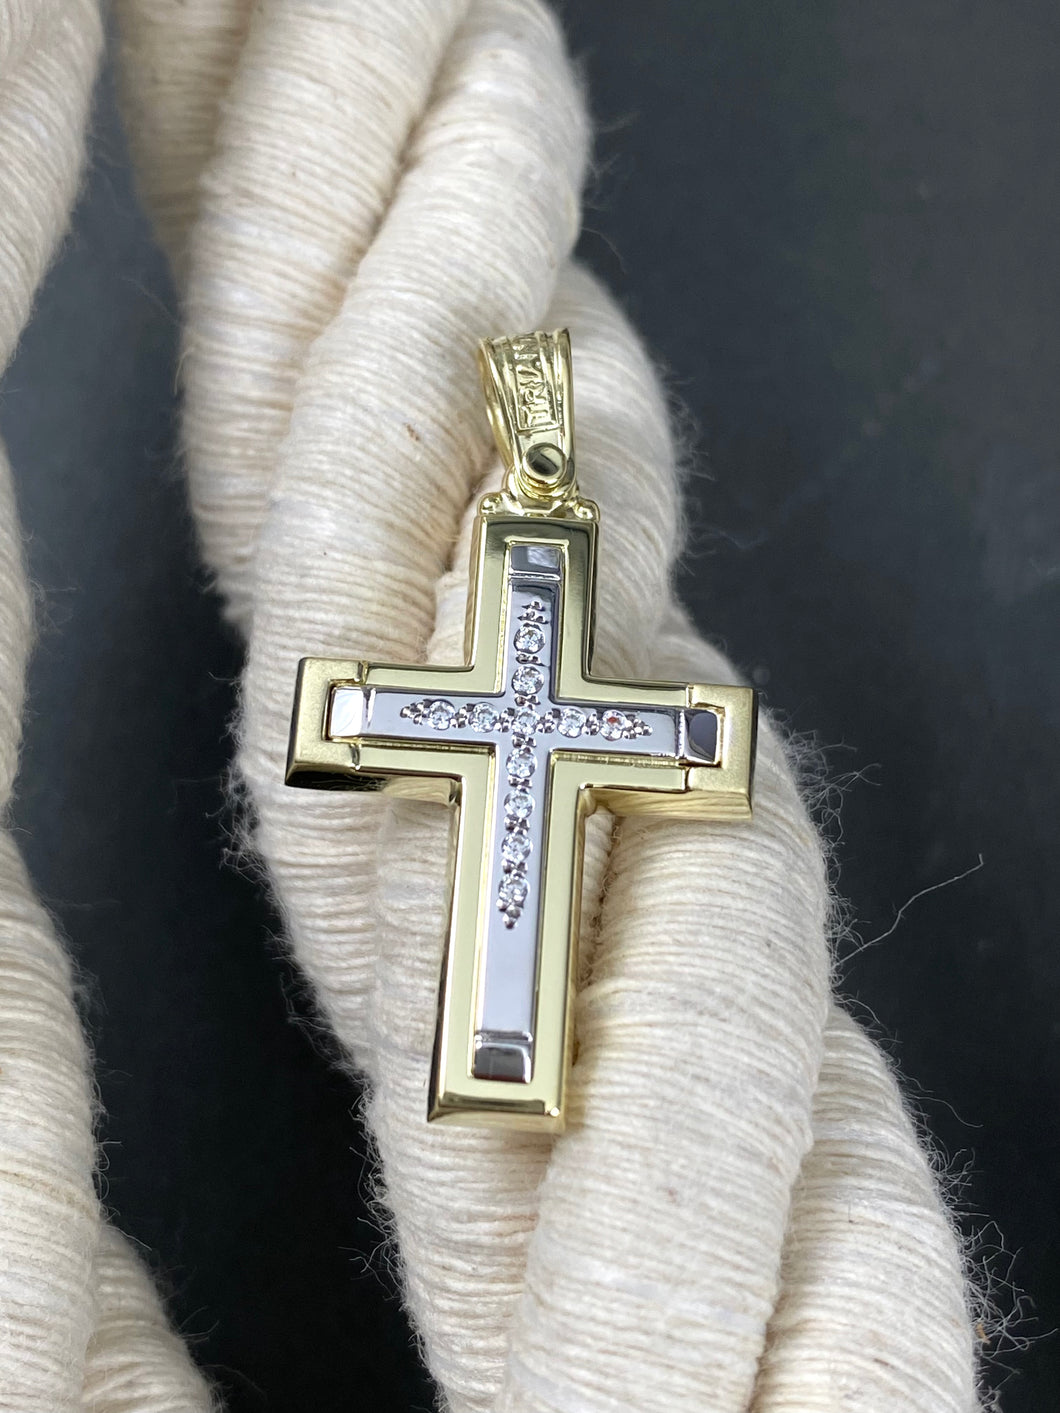 Triantos 14k 2 Tone White and Yellow Gold Polished and Brushed Cross with Precious Stones 3.60g